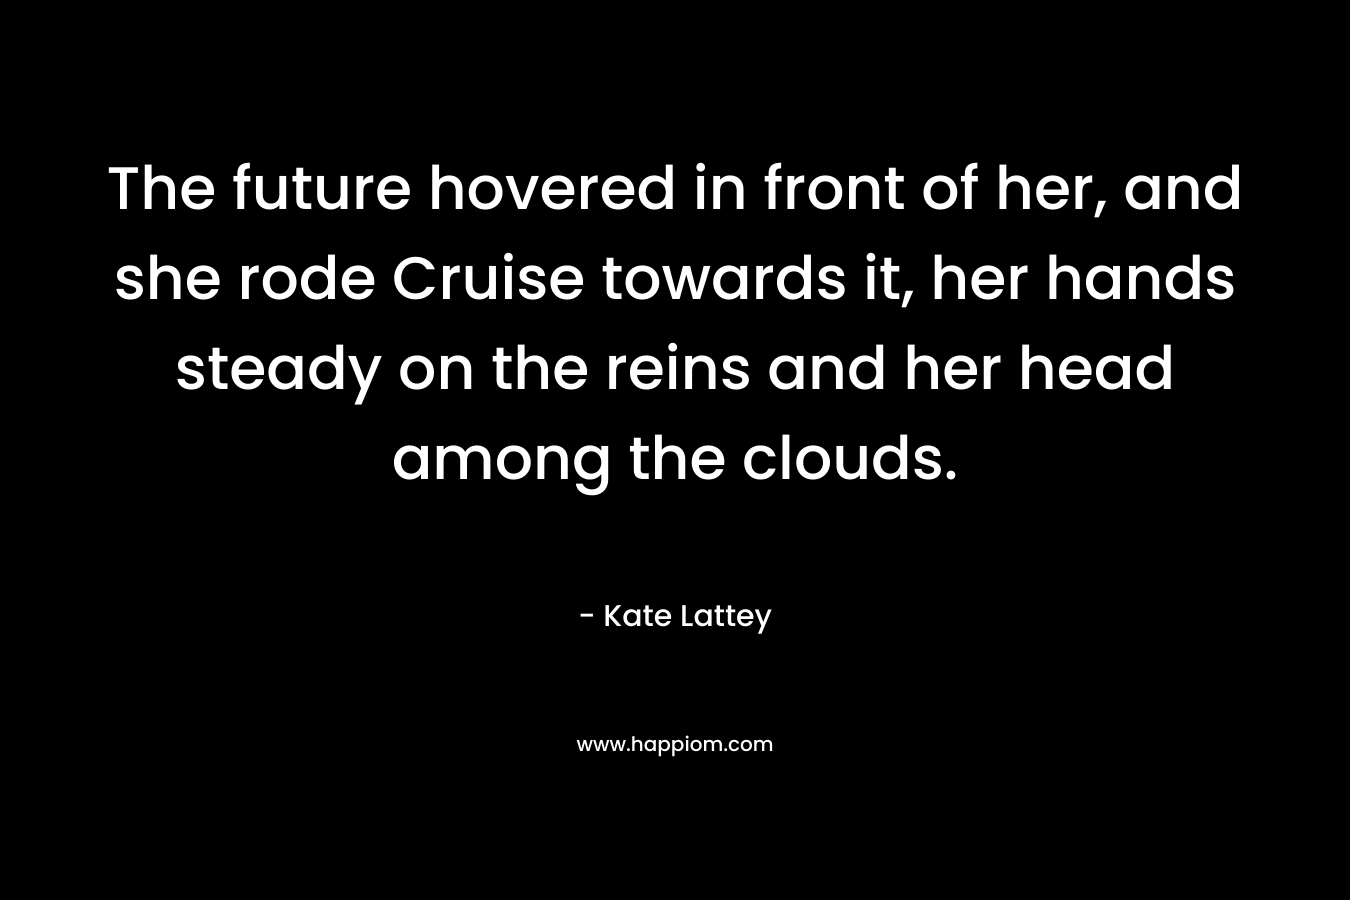 The future hovered in front of her, and she rode Cruise towards it, her hands steady on the reins and her head among the clouds. – Kate Lattey